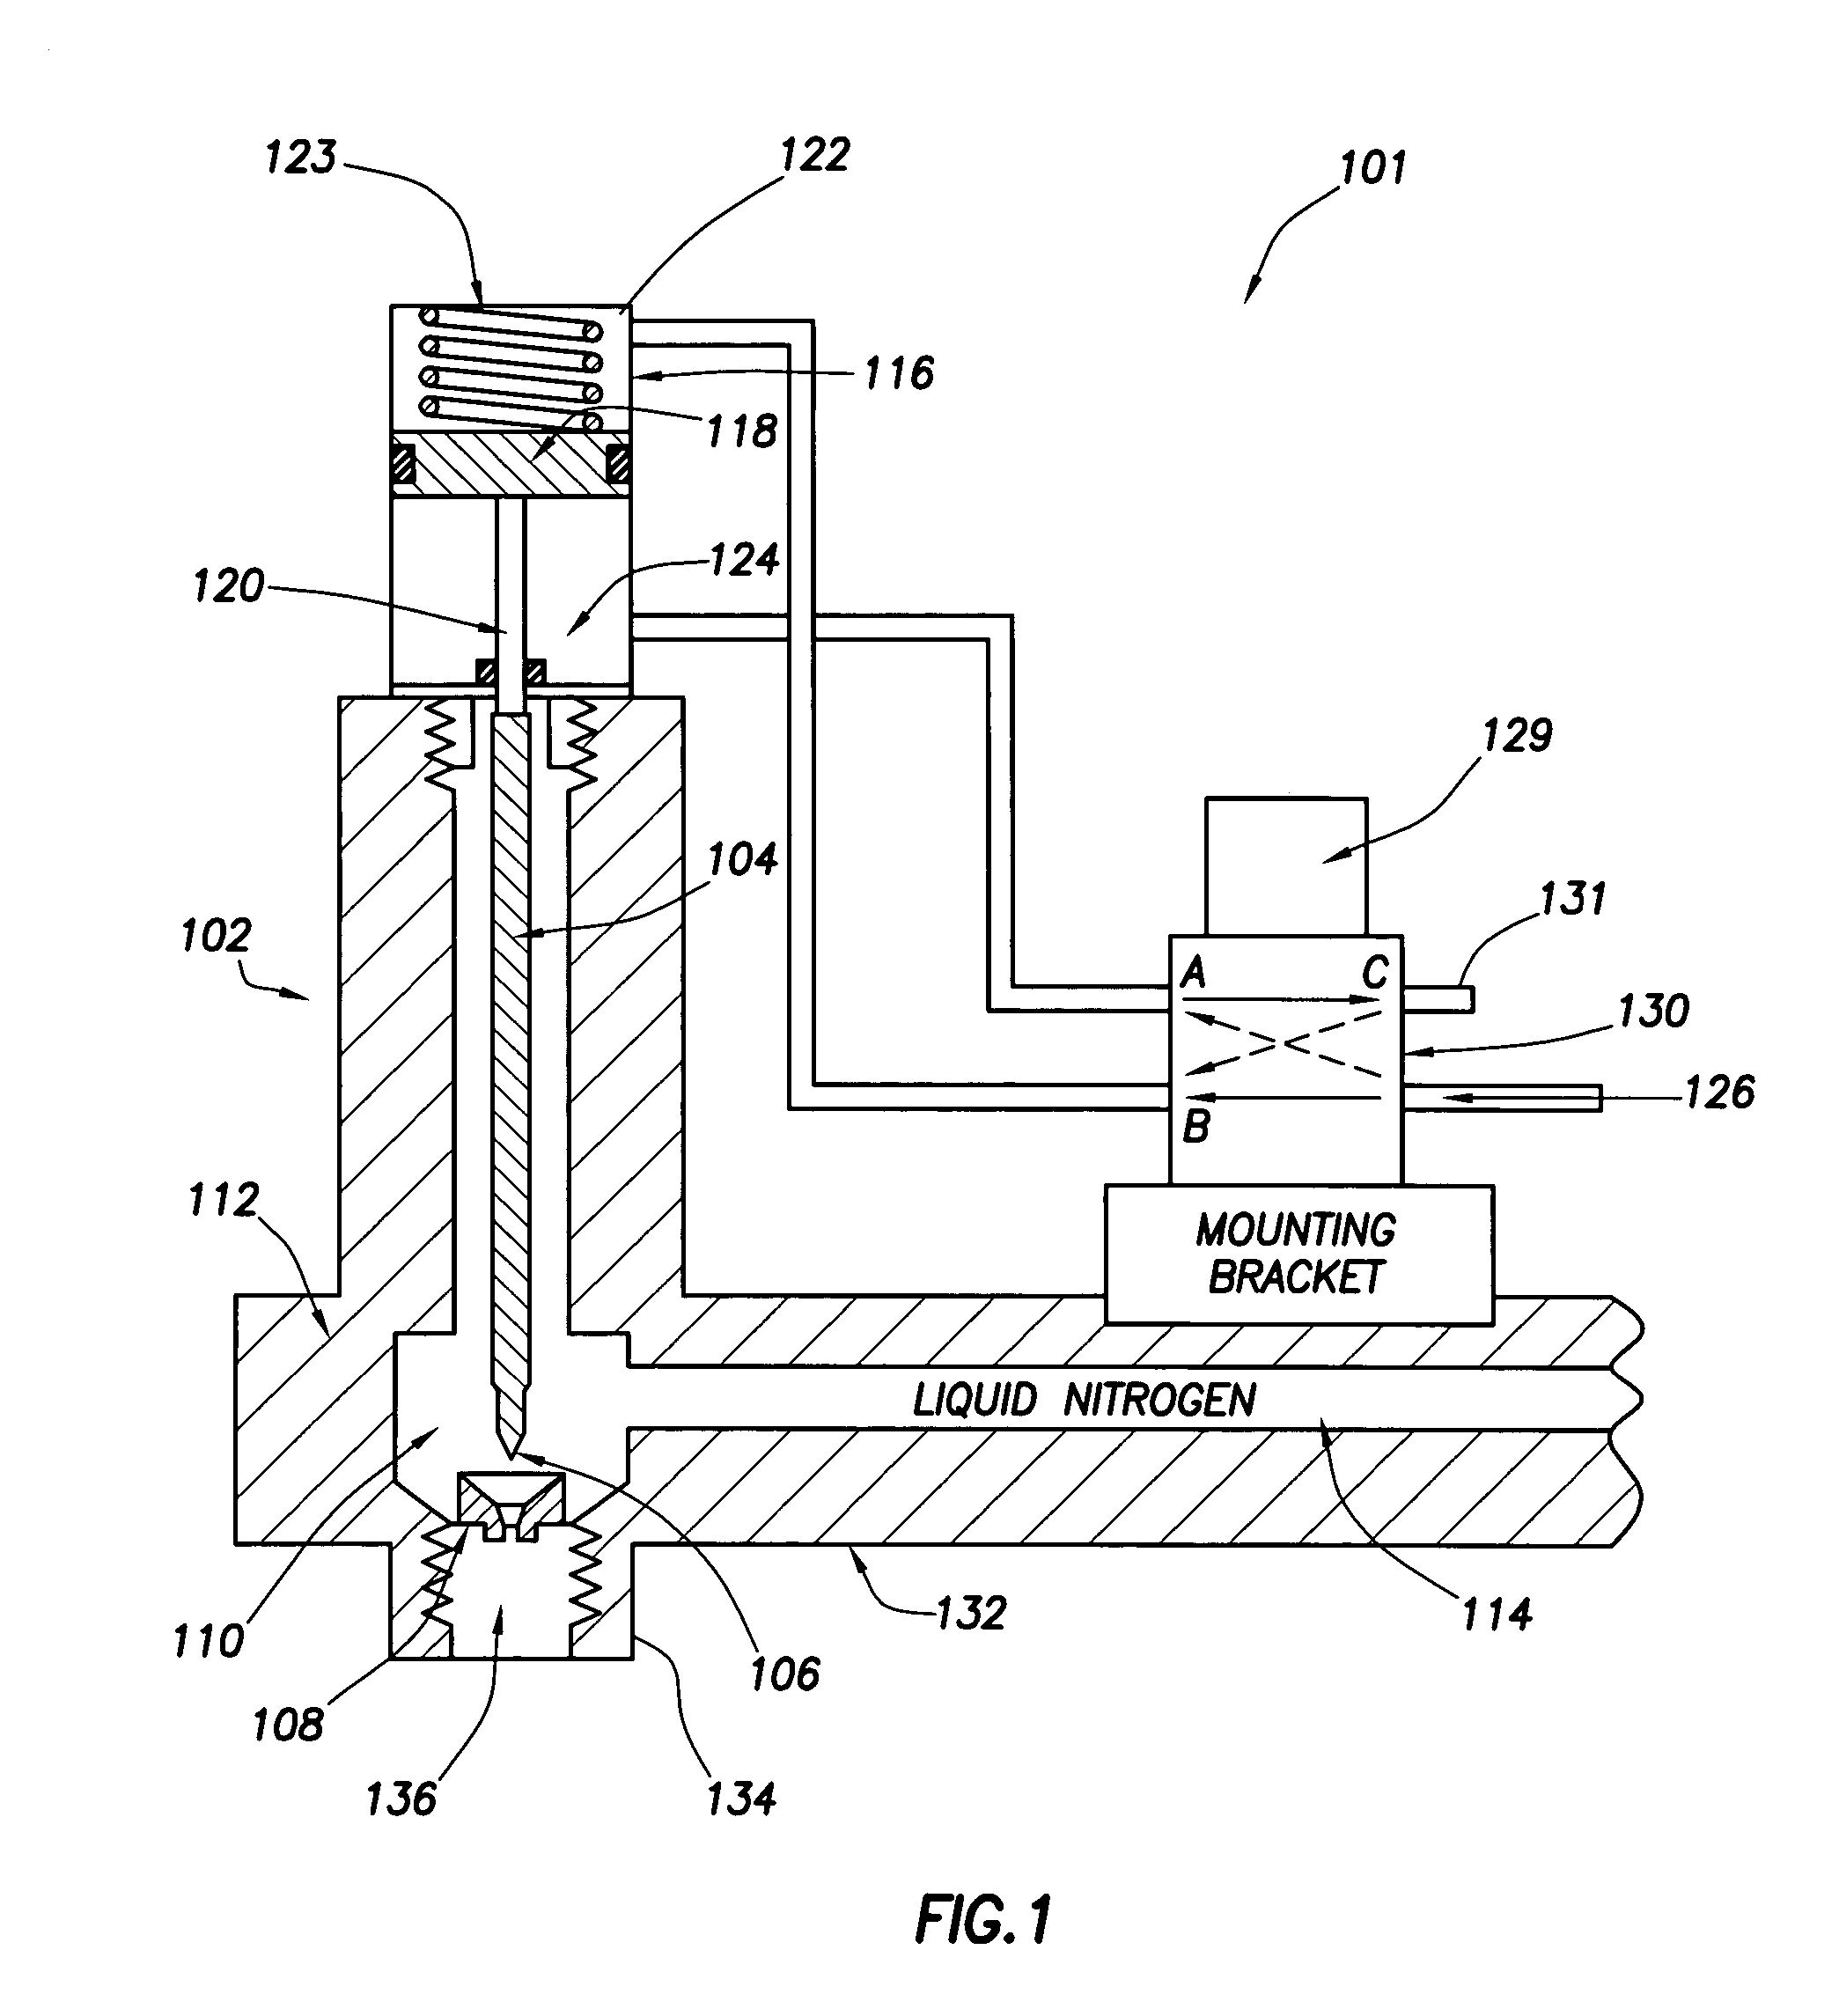 Liquid delivery system with horizontally displaced dispensing point